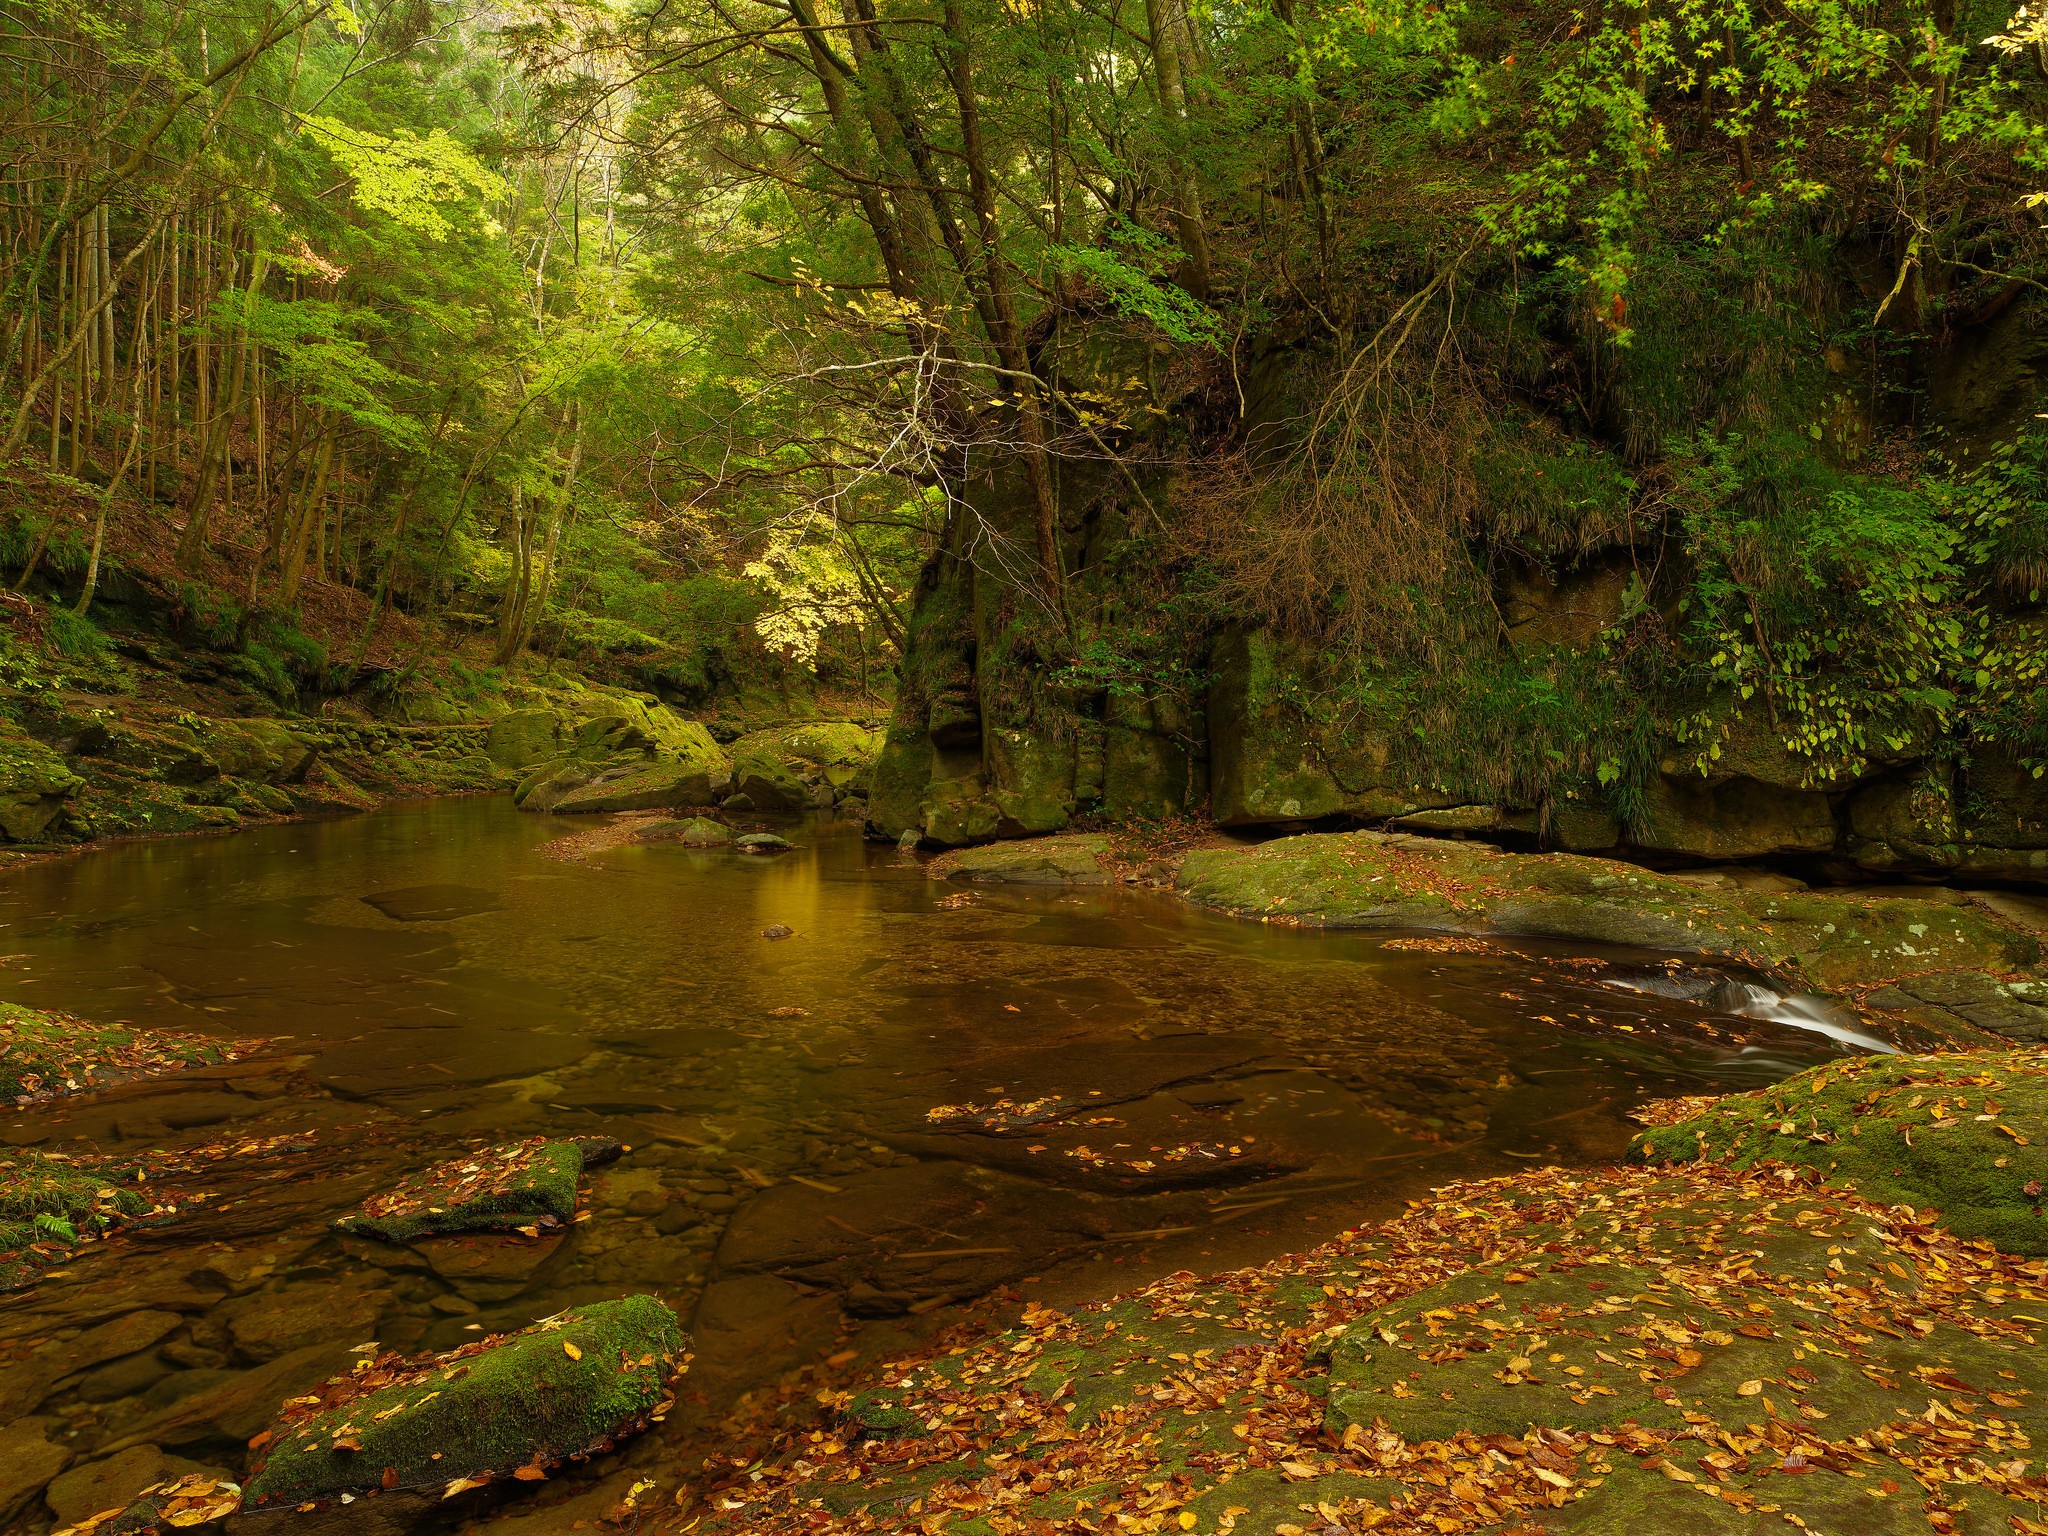 General 2048x1536 river wilderness forest creeks nature fallen leaves outdoors plants trees